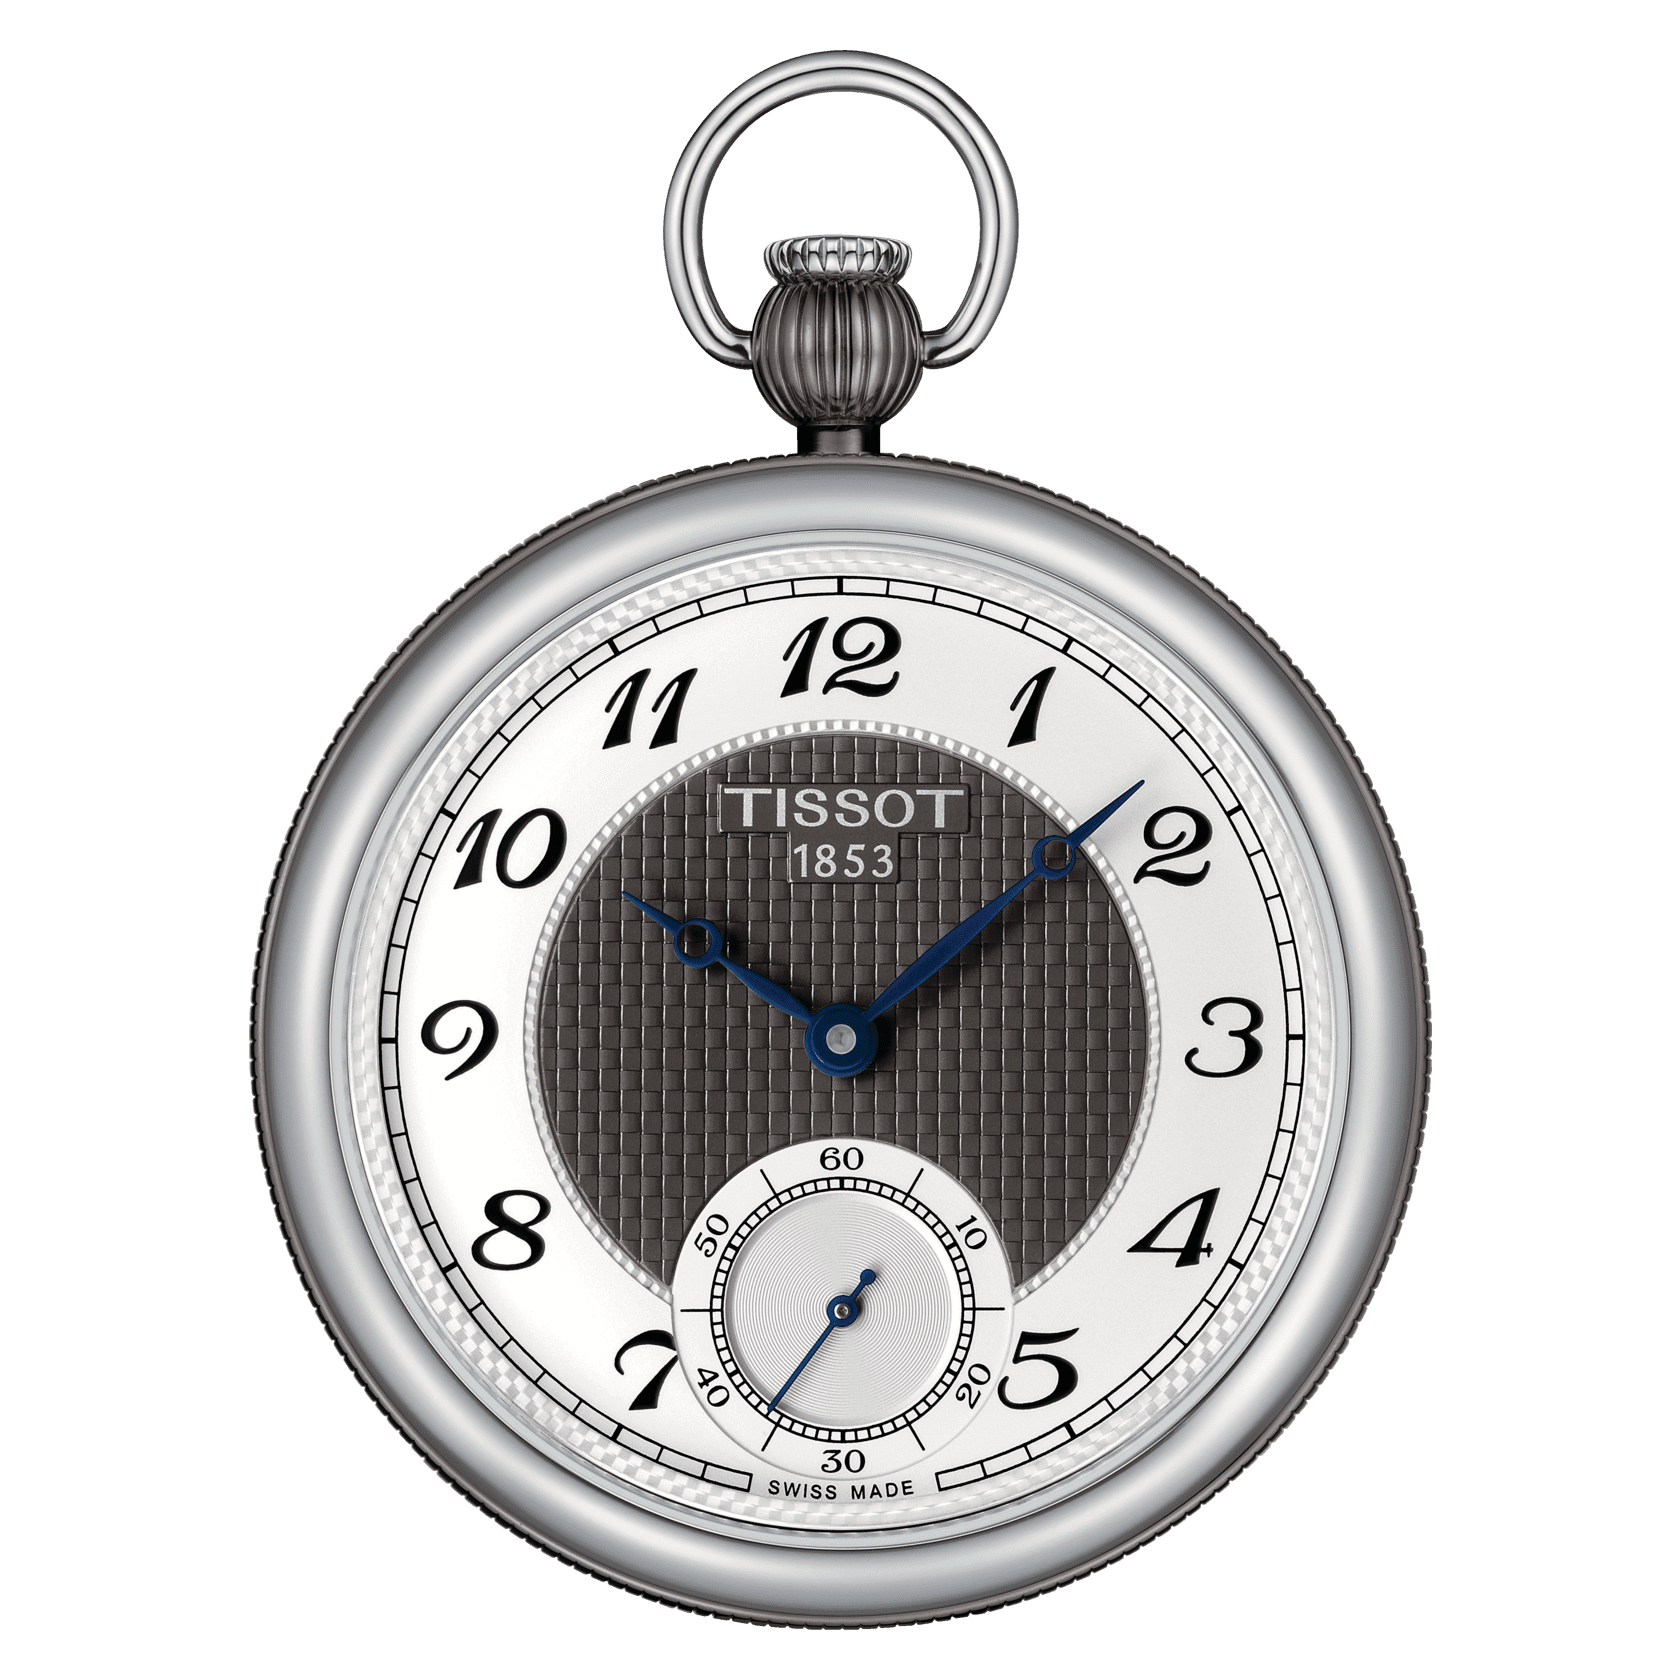 Imitations Jaeger Lecoultre Watches